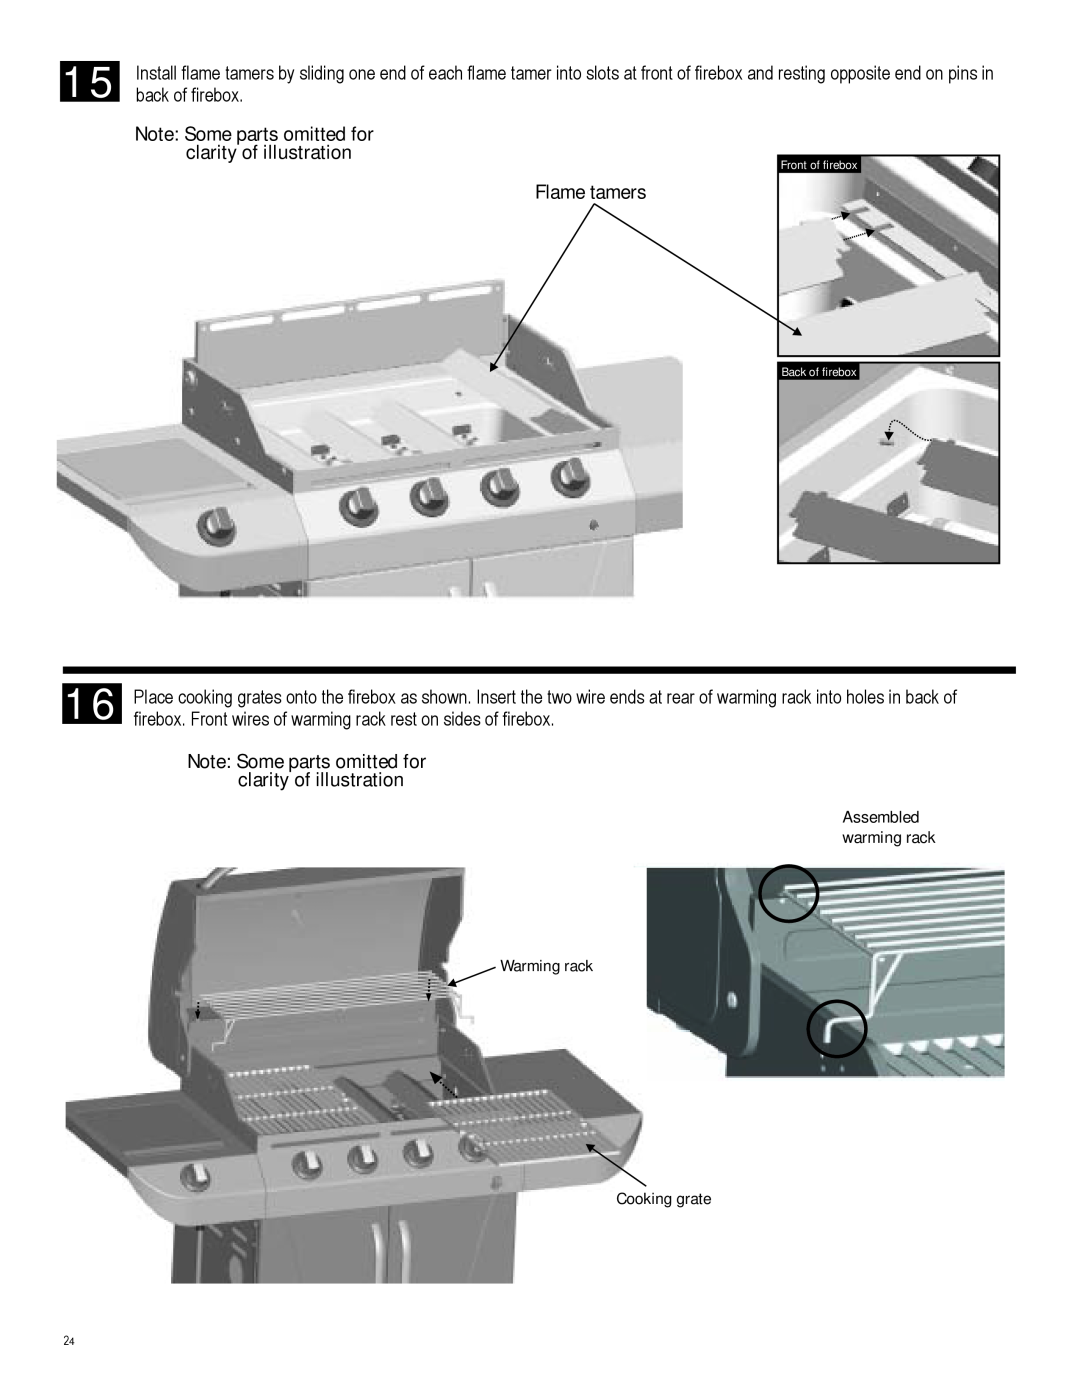 Char-Broil 463257010 manual Note Some parts omitted for, clarity of illustration, Flametamers, Warming rack Cooking grate 